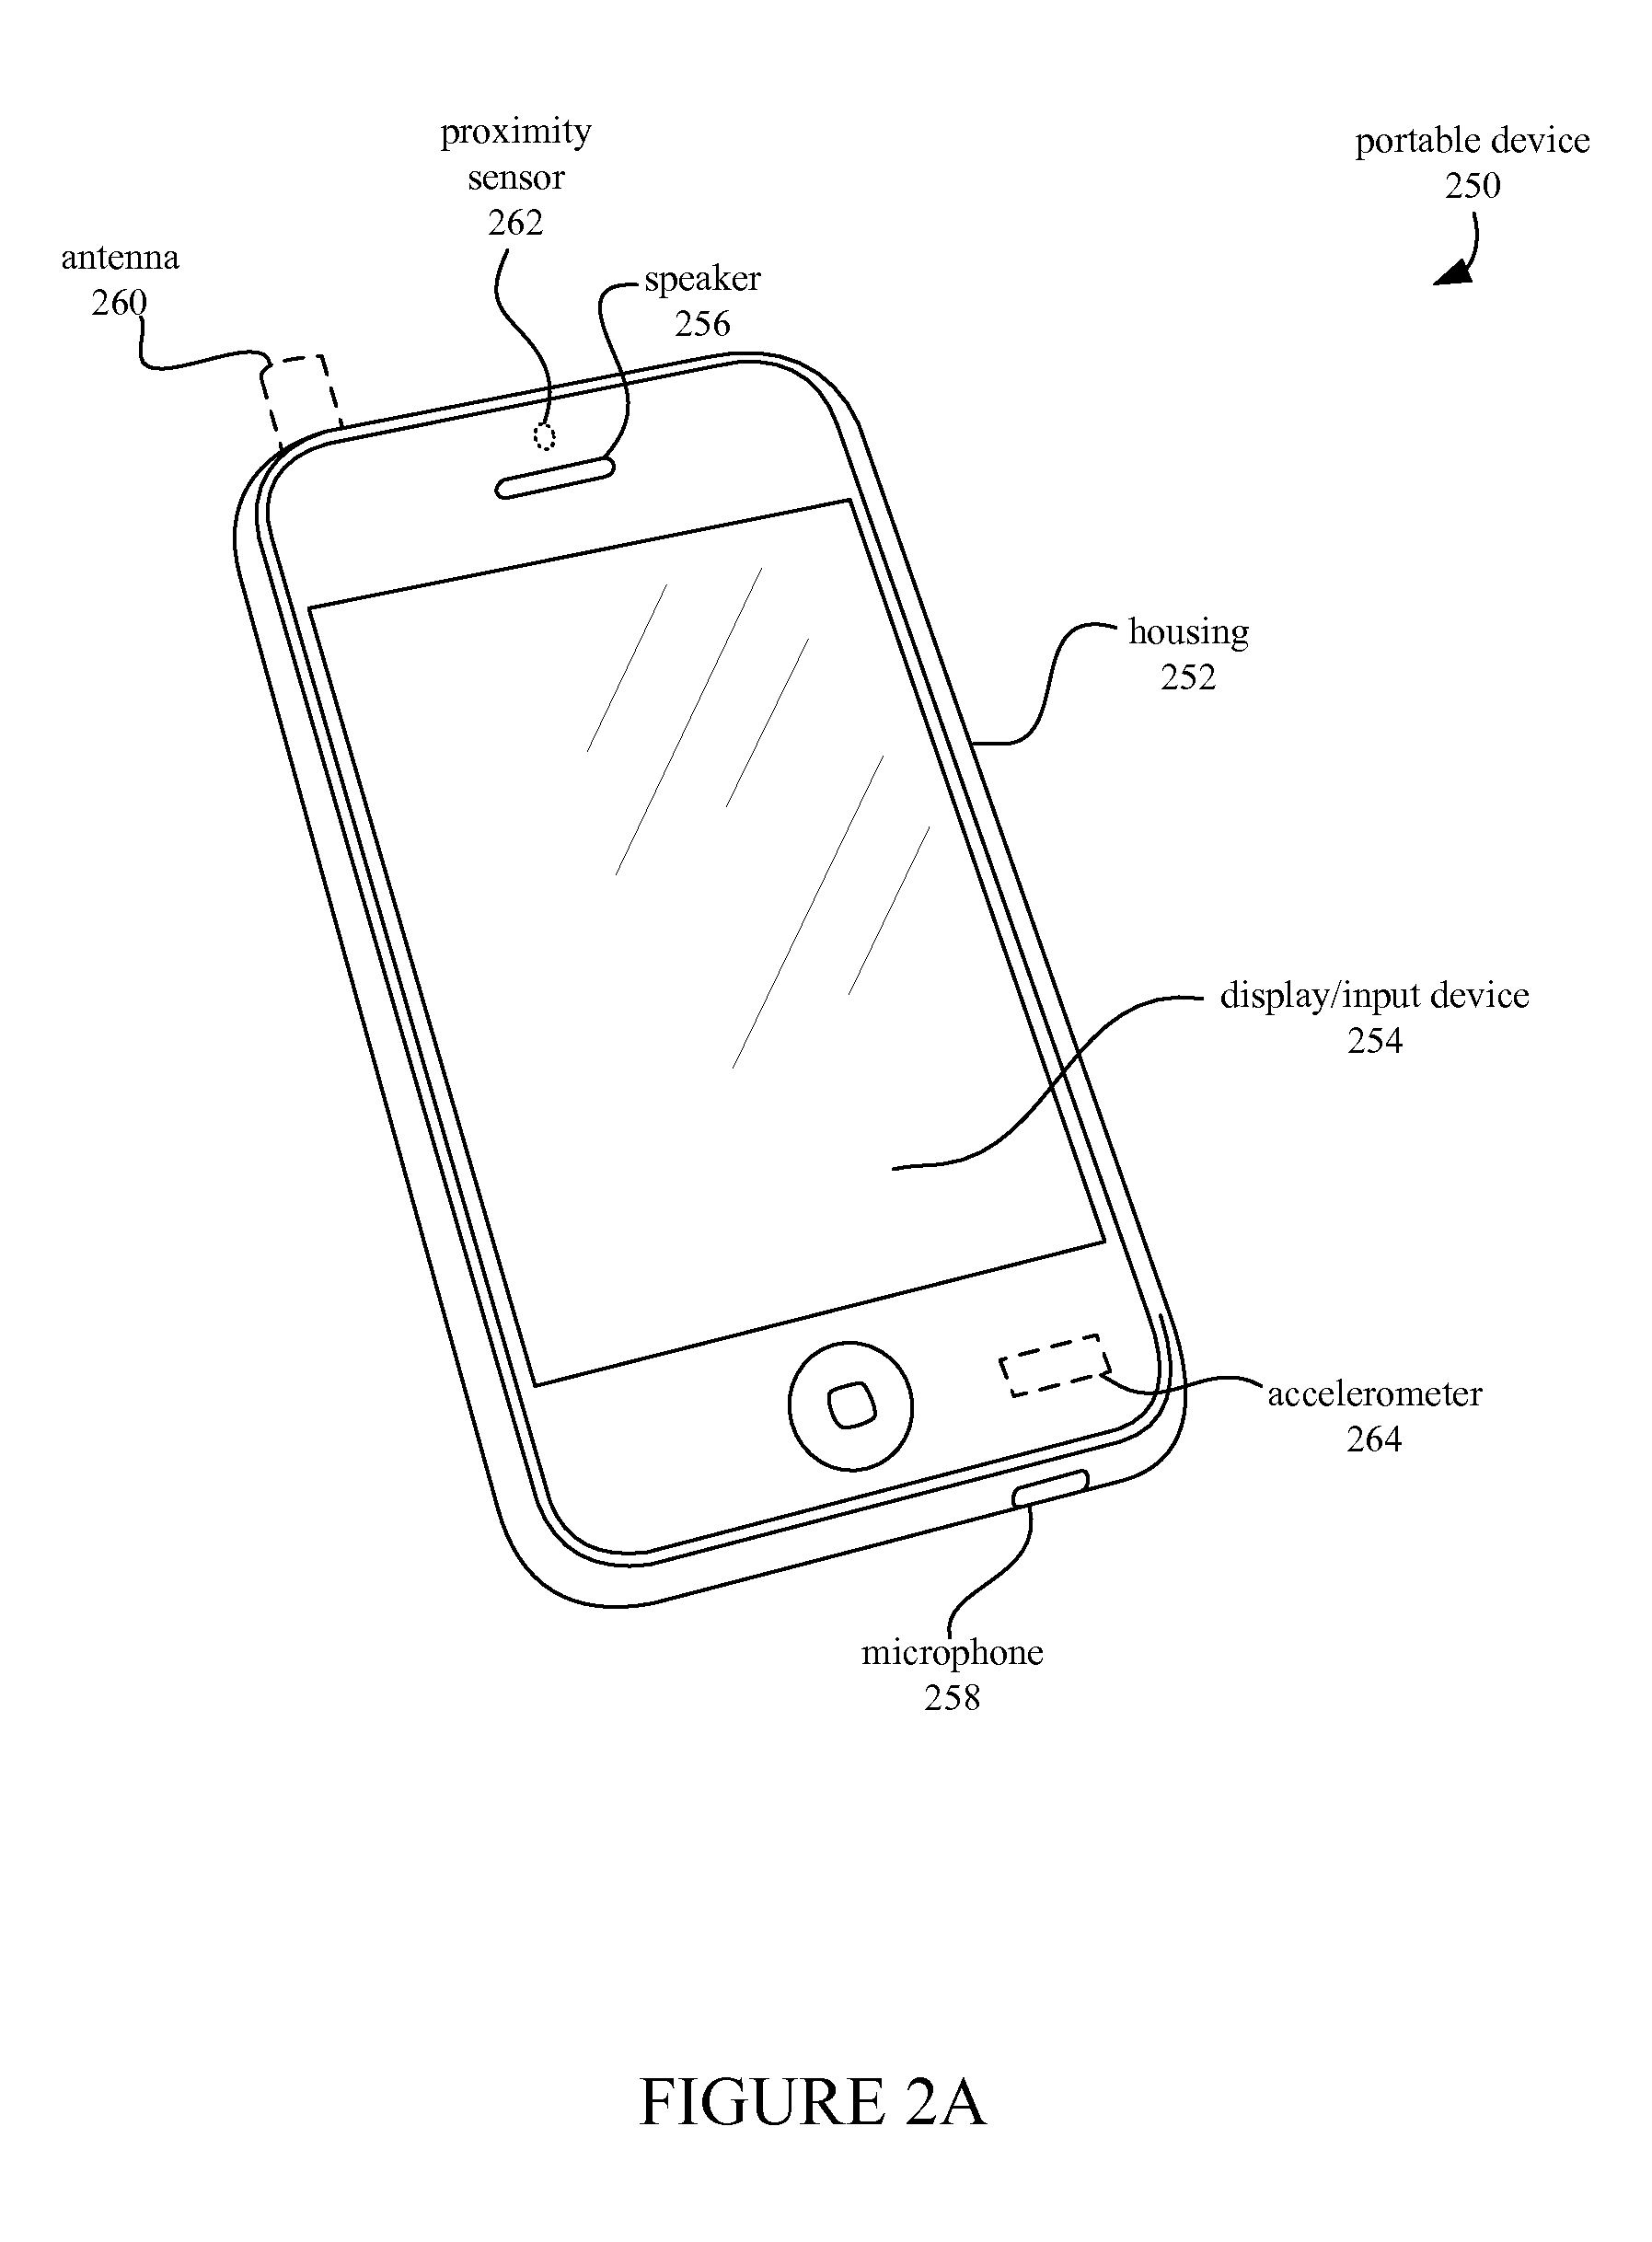 Search capability implementation for a device